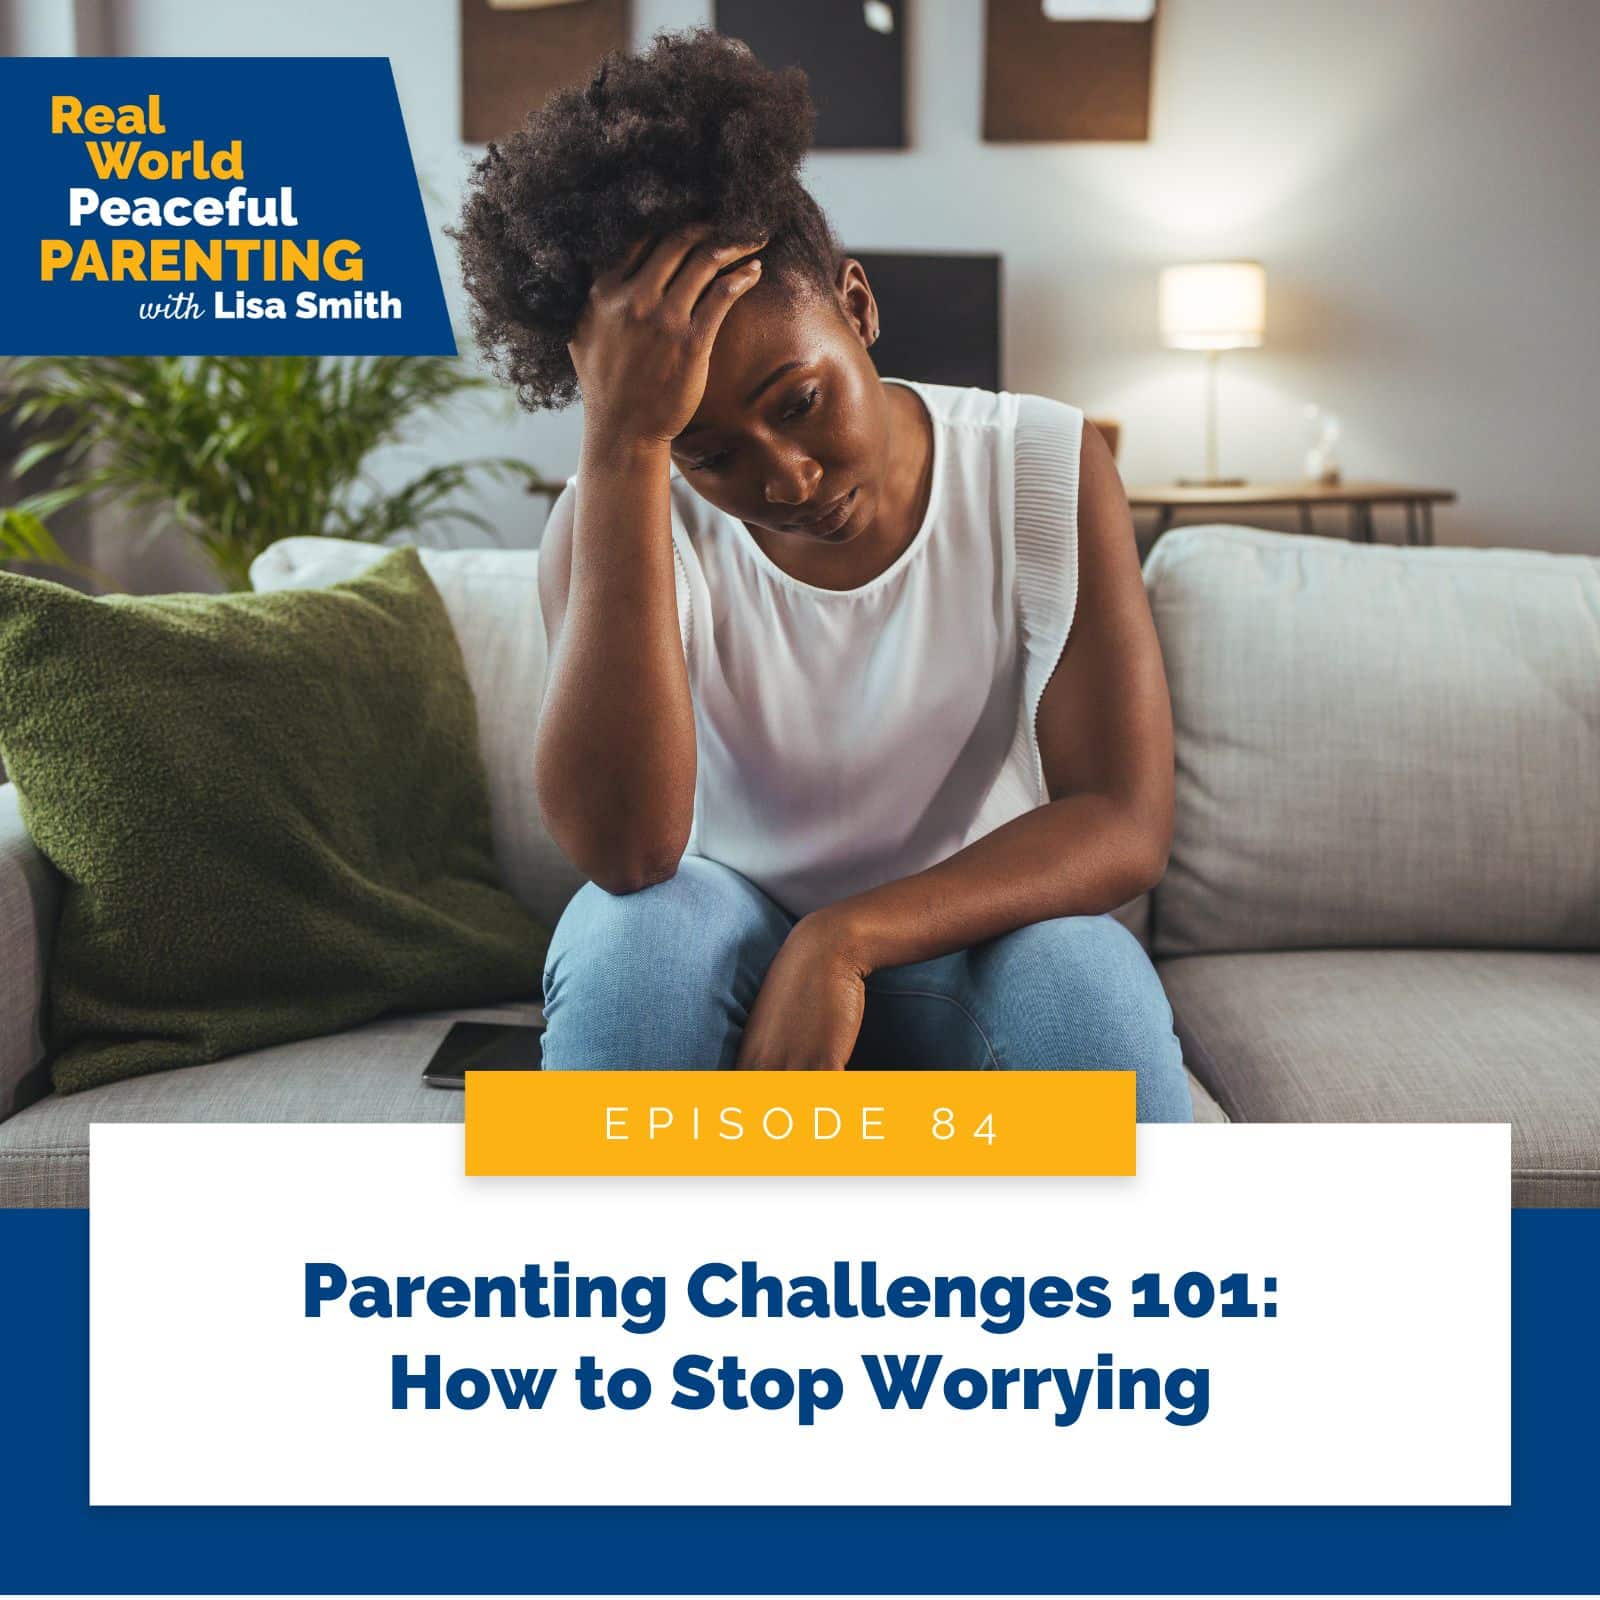 Real World Peaceful Parenting |Parenting Challenges 101: How to Stop Worrying